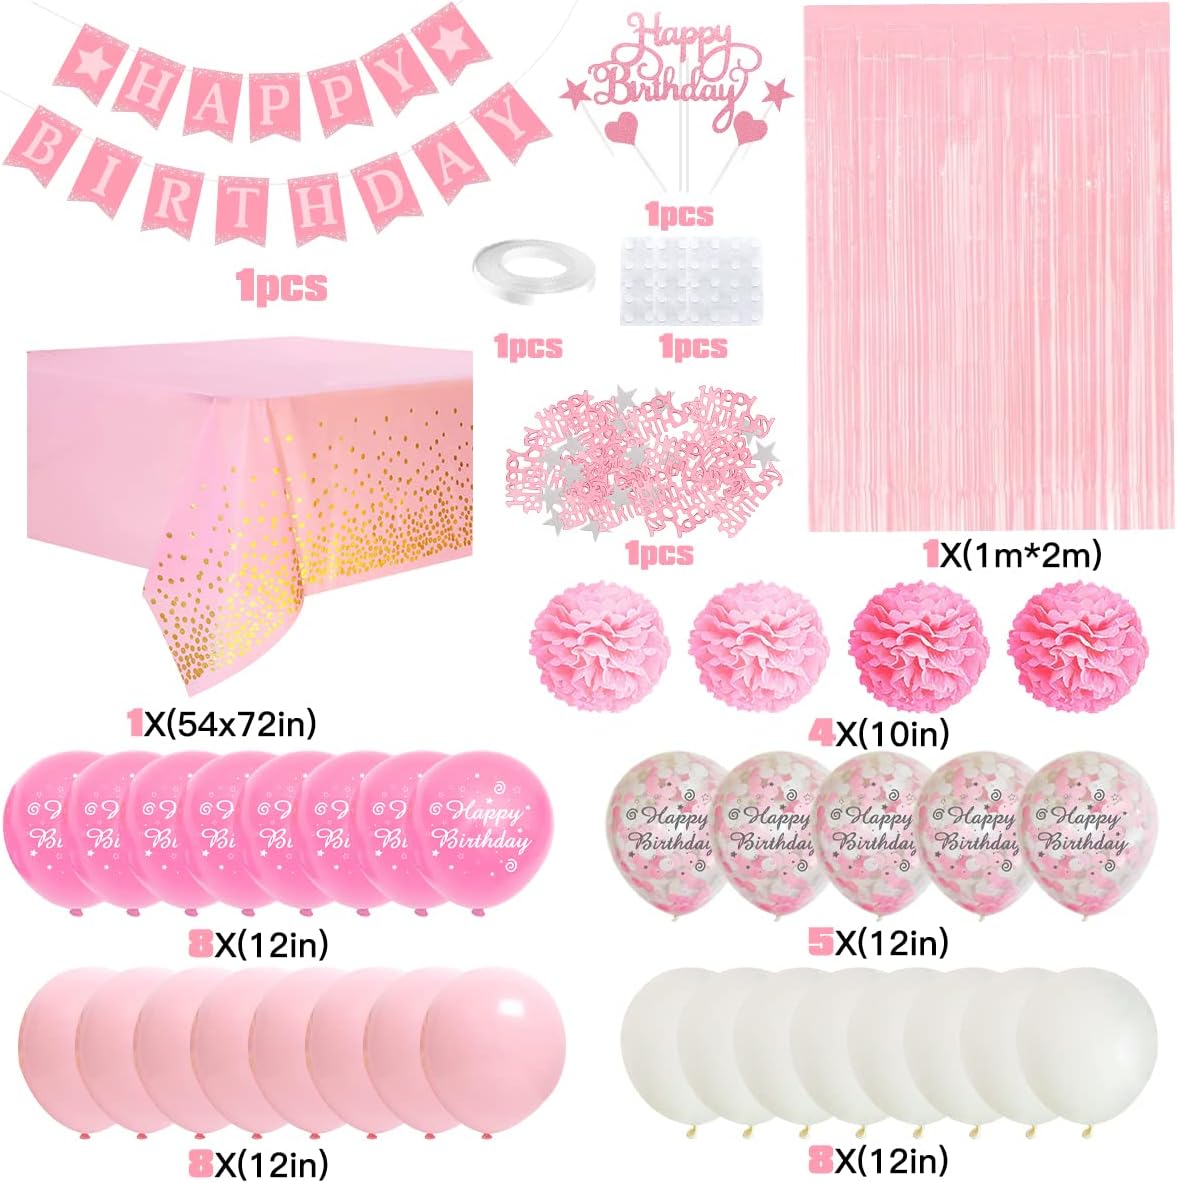 Pink Birthday Decorations Pink and White Balloons Happy Birthday Banner Tablecloth Paper Pom Poms Foil Fringe Curtain